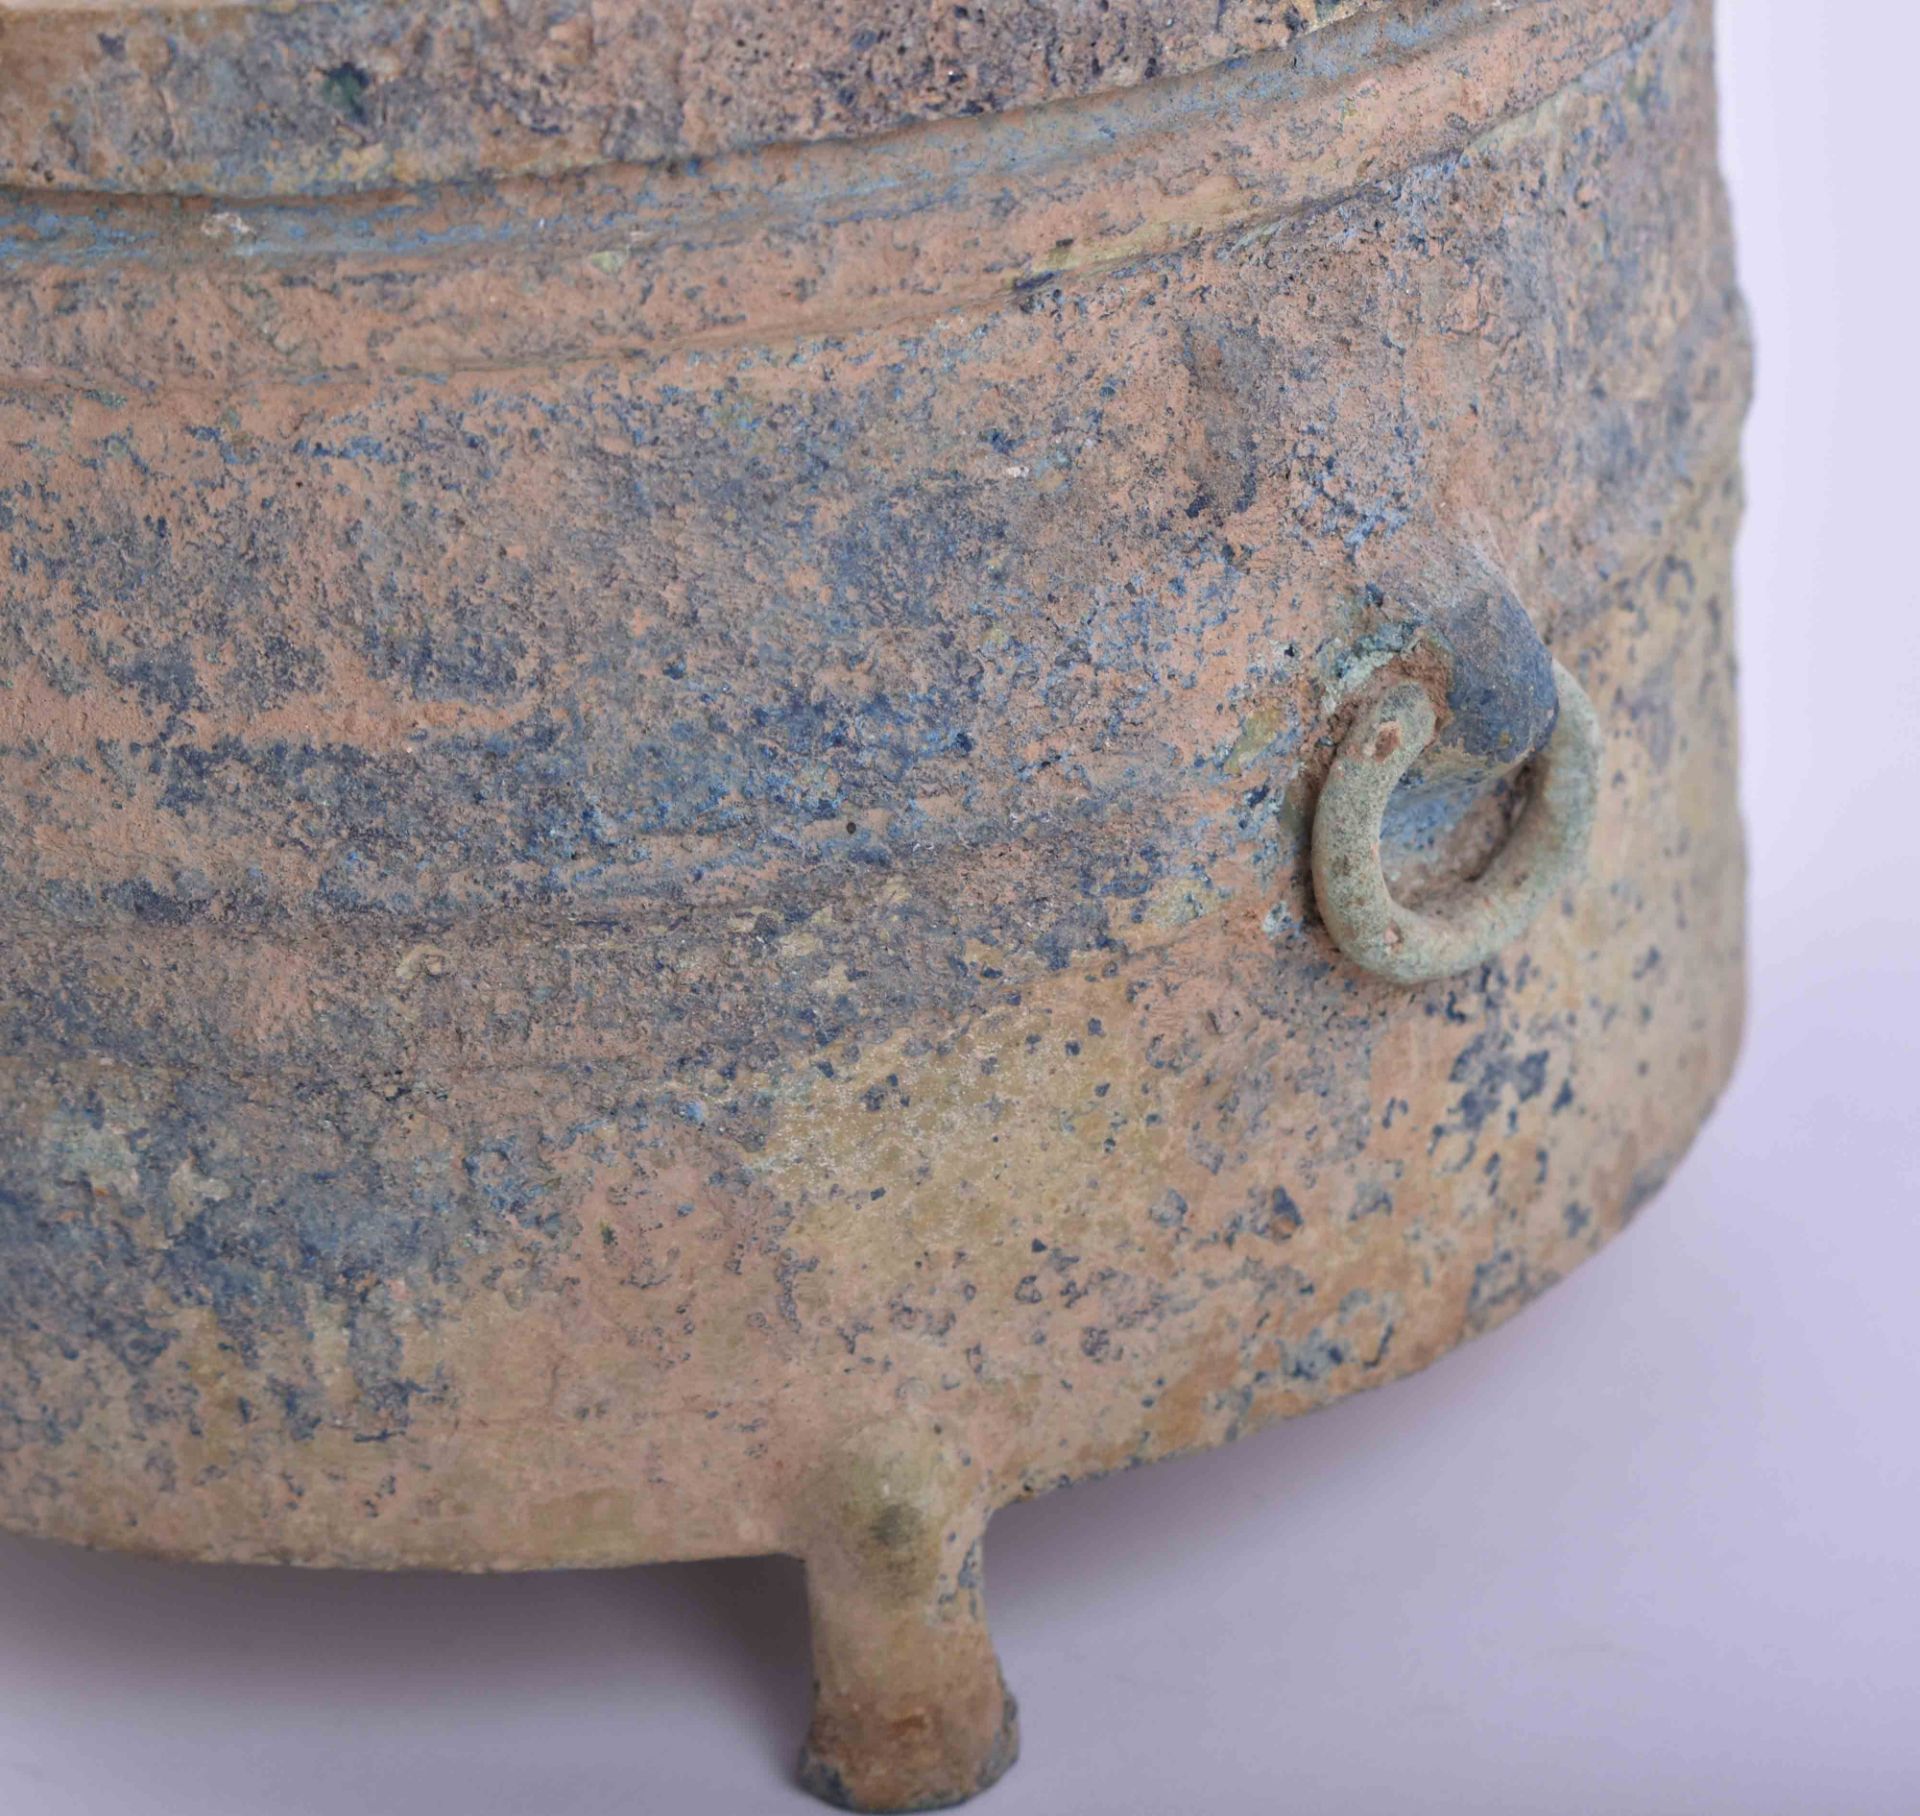  Lid vessel China Han dynasty - Image 4 of 6